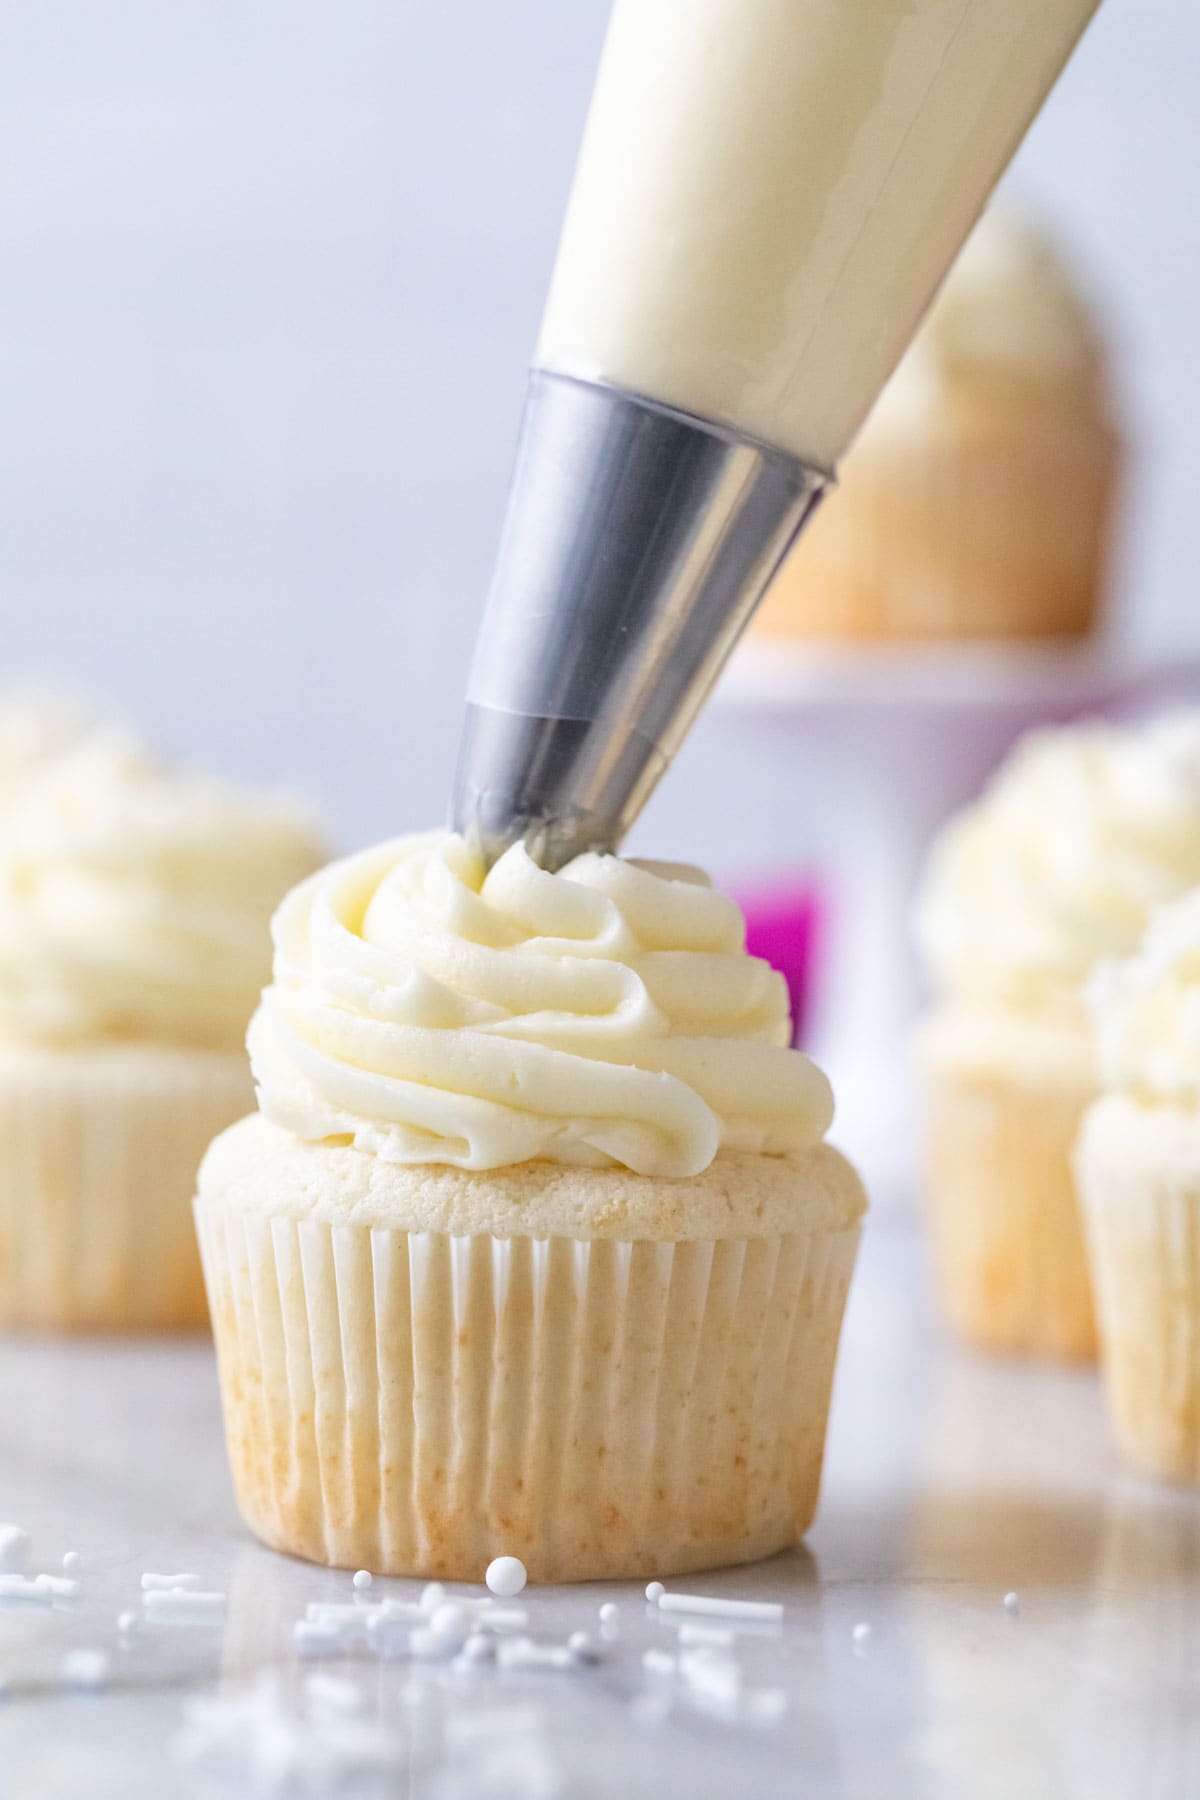 Vanilla frosting being piped on top of a white cupcake.